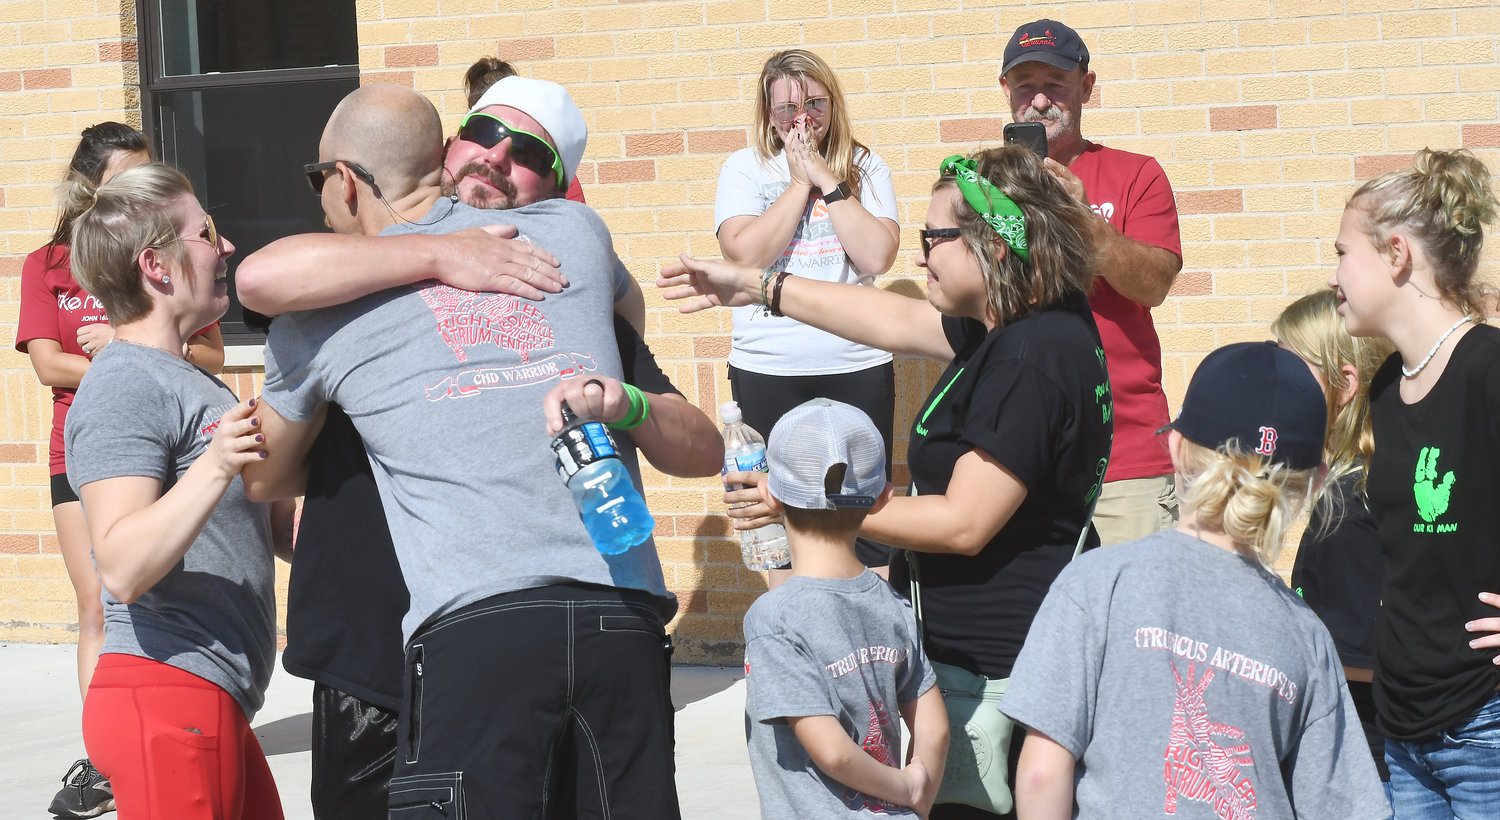 Donor family meets recipient’s family at ‘Celebrate Life’ event. Their families — linked forever by a bond few could image — met for the first time Sunday during a “Surprise 5K” walk and run in Owensville to benefit the Mid-America Transplant program’s Celebrate Life campaign. Chris McDougald, Lebanon, Mo., (facing camera) embraces Brett Palmer of Owensville as their respective wives, Danielle Palmer (left) and Stephanie McDougald reach out to greet each other with a hug. The McDougald’s son, Ki, 3, died Oct. 29, 2019, from injuries in a “freak” all-terrain vehicle crash three days earlier. The Palmer’s son, Truett, born with a genetic heart condition, received Ki’s heart the following day. Truett would live another year before what was described by his mother as a common “bug” caused his death on Nov. 3, 2020. The Palmers had been at their’s son’s one-year transplant checkup when he fell ill. Truett’s transplanted heart from the McDougald’s son was healthy. A “common ailment” causing a lung infection was cited as his cause of death at the age of 3 years and 8 months. As friends and family of the Truetts waited to begin the 5K fund-raiser, the families of two boys — forever linked together through organ donation — embraced. Then walked together.